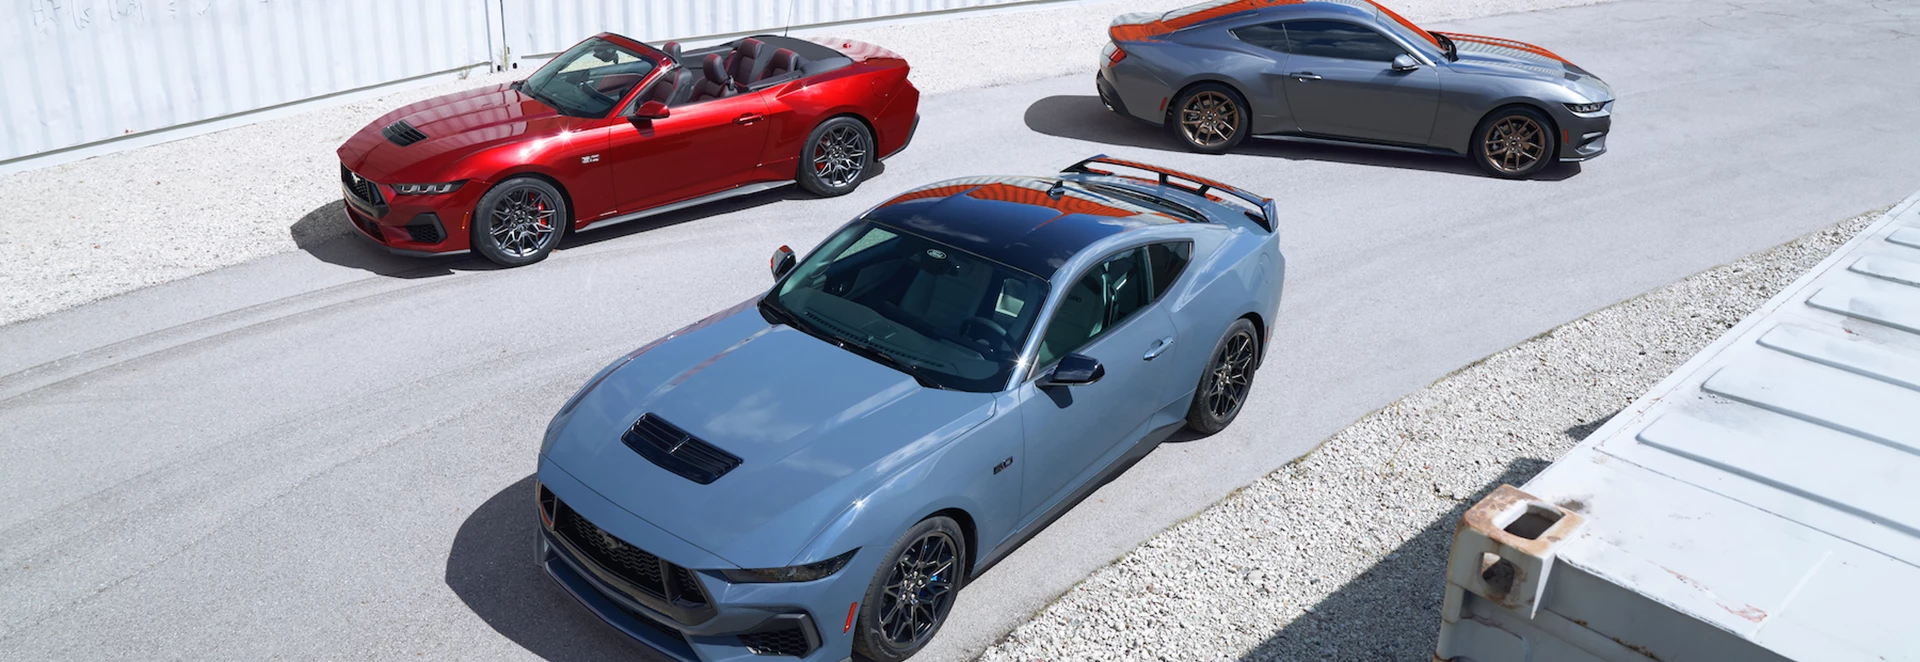 New 2023 Ford Mustang: 5 things you need to know 